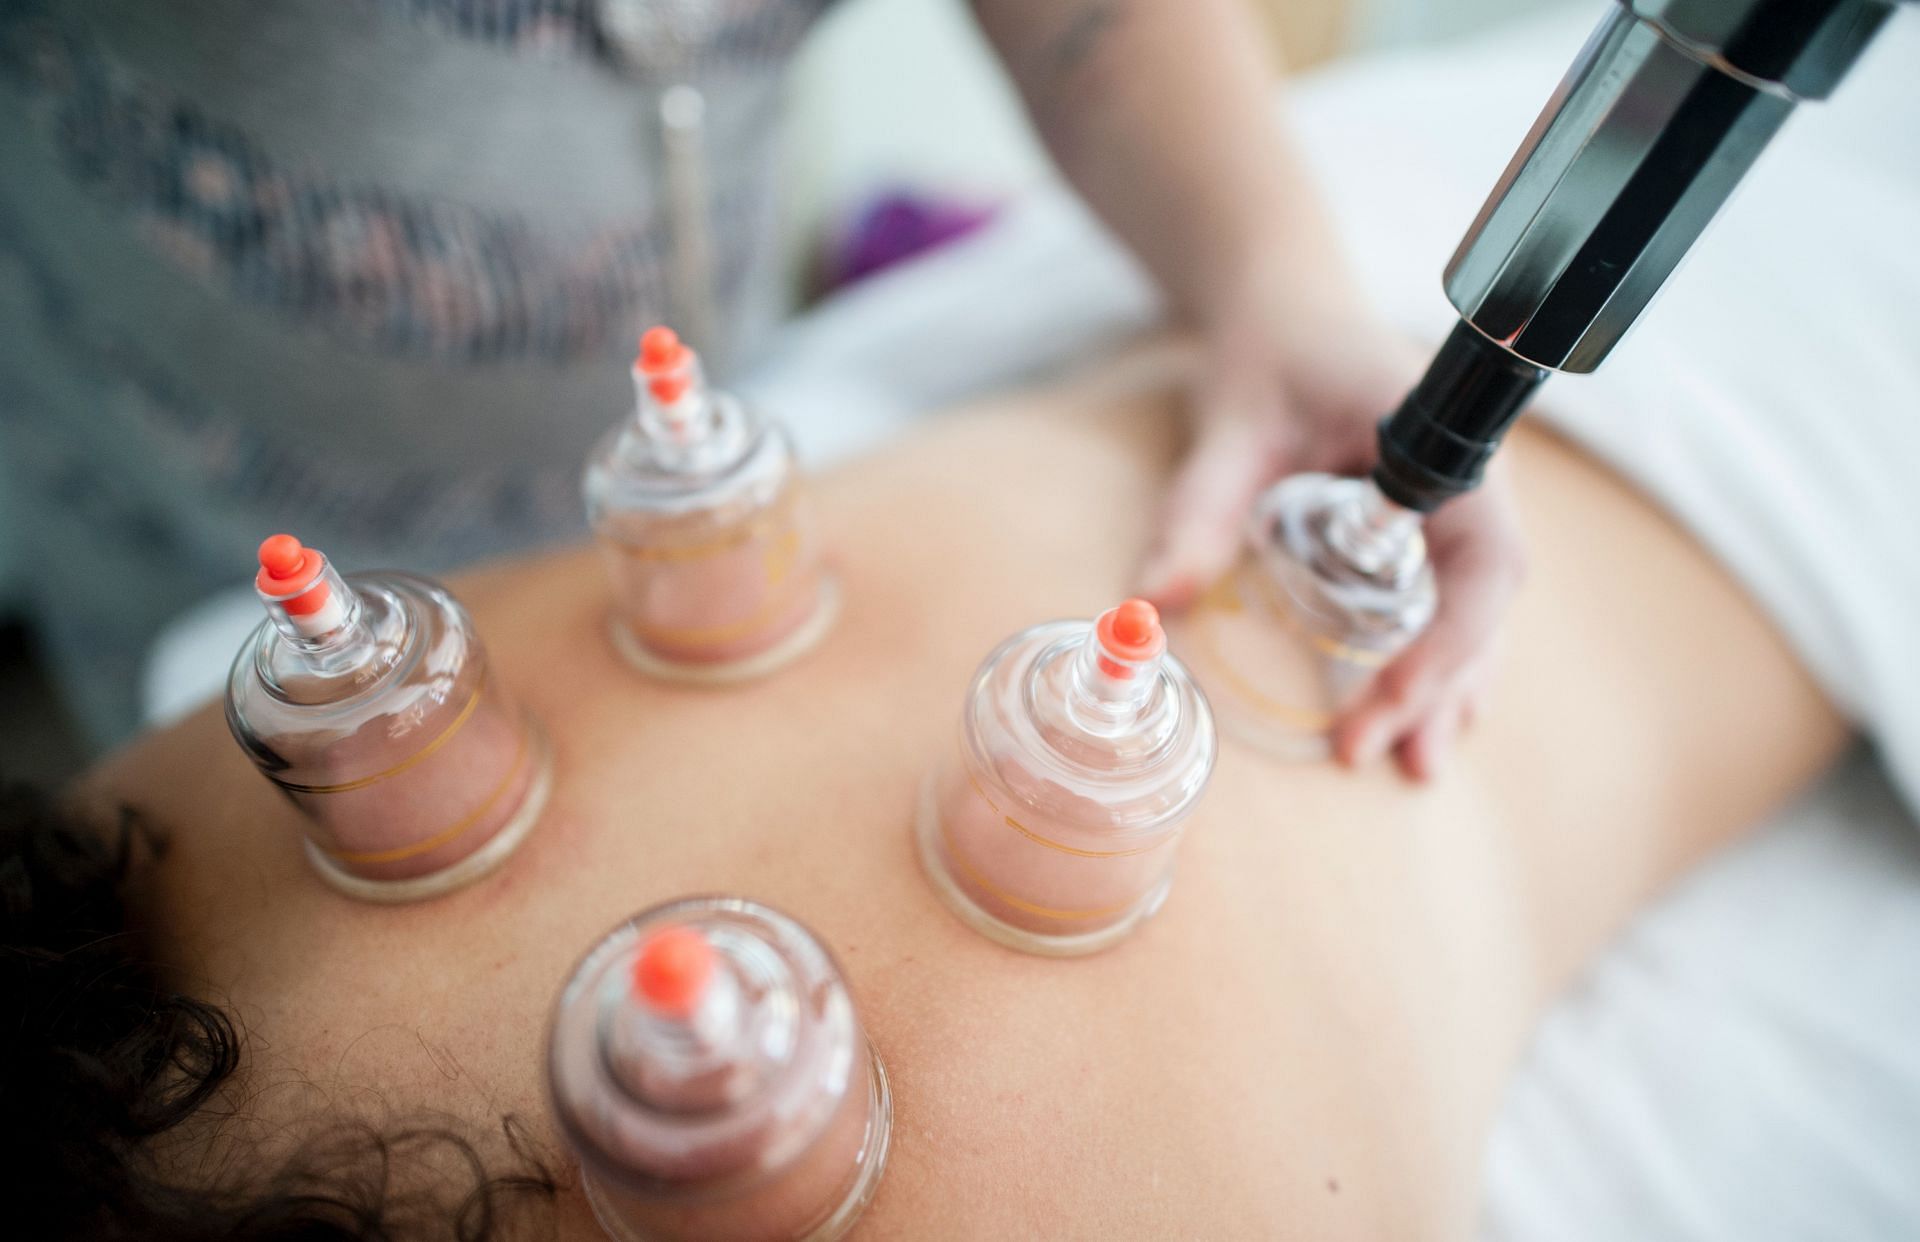 Cupping therapy treat a variety of problems, including stress, pain, allergies, exhaustion, flu. (Image via Unsplash/ Katherine Hanlon)